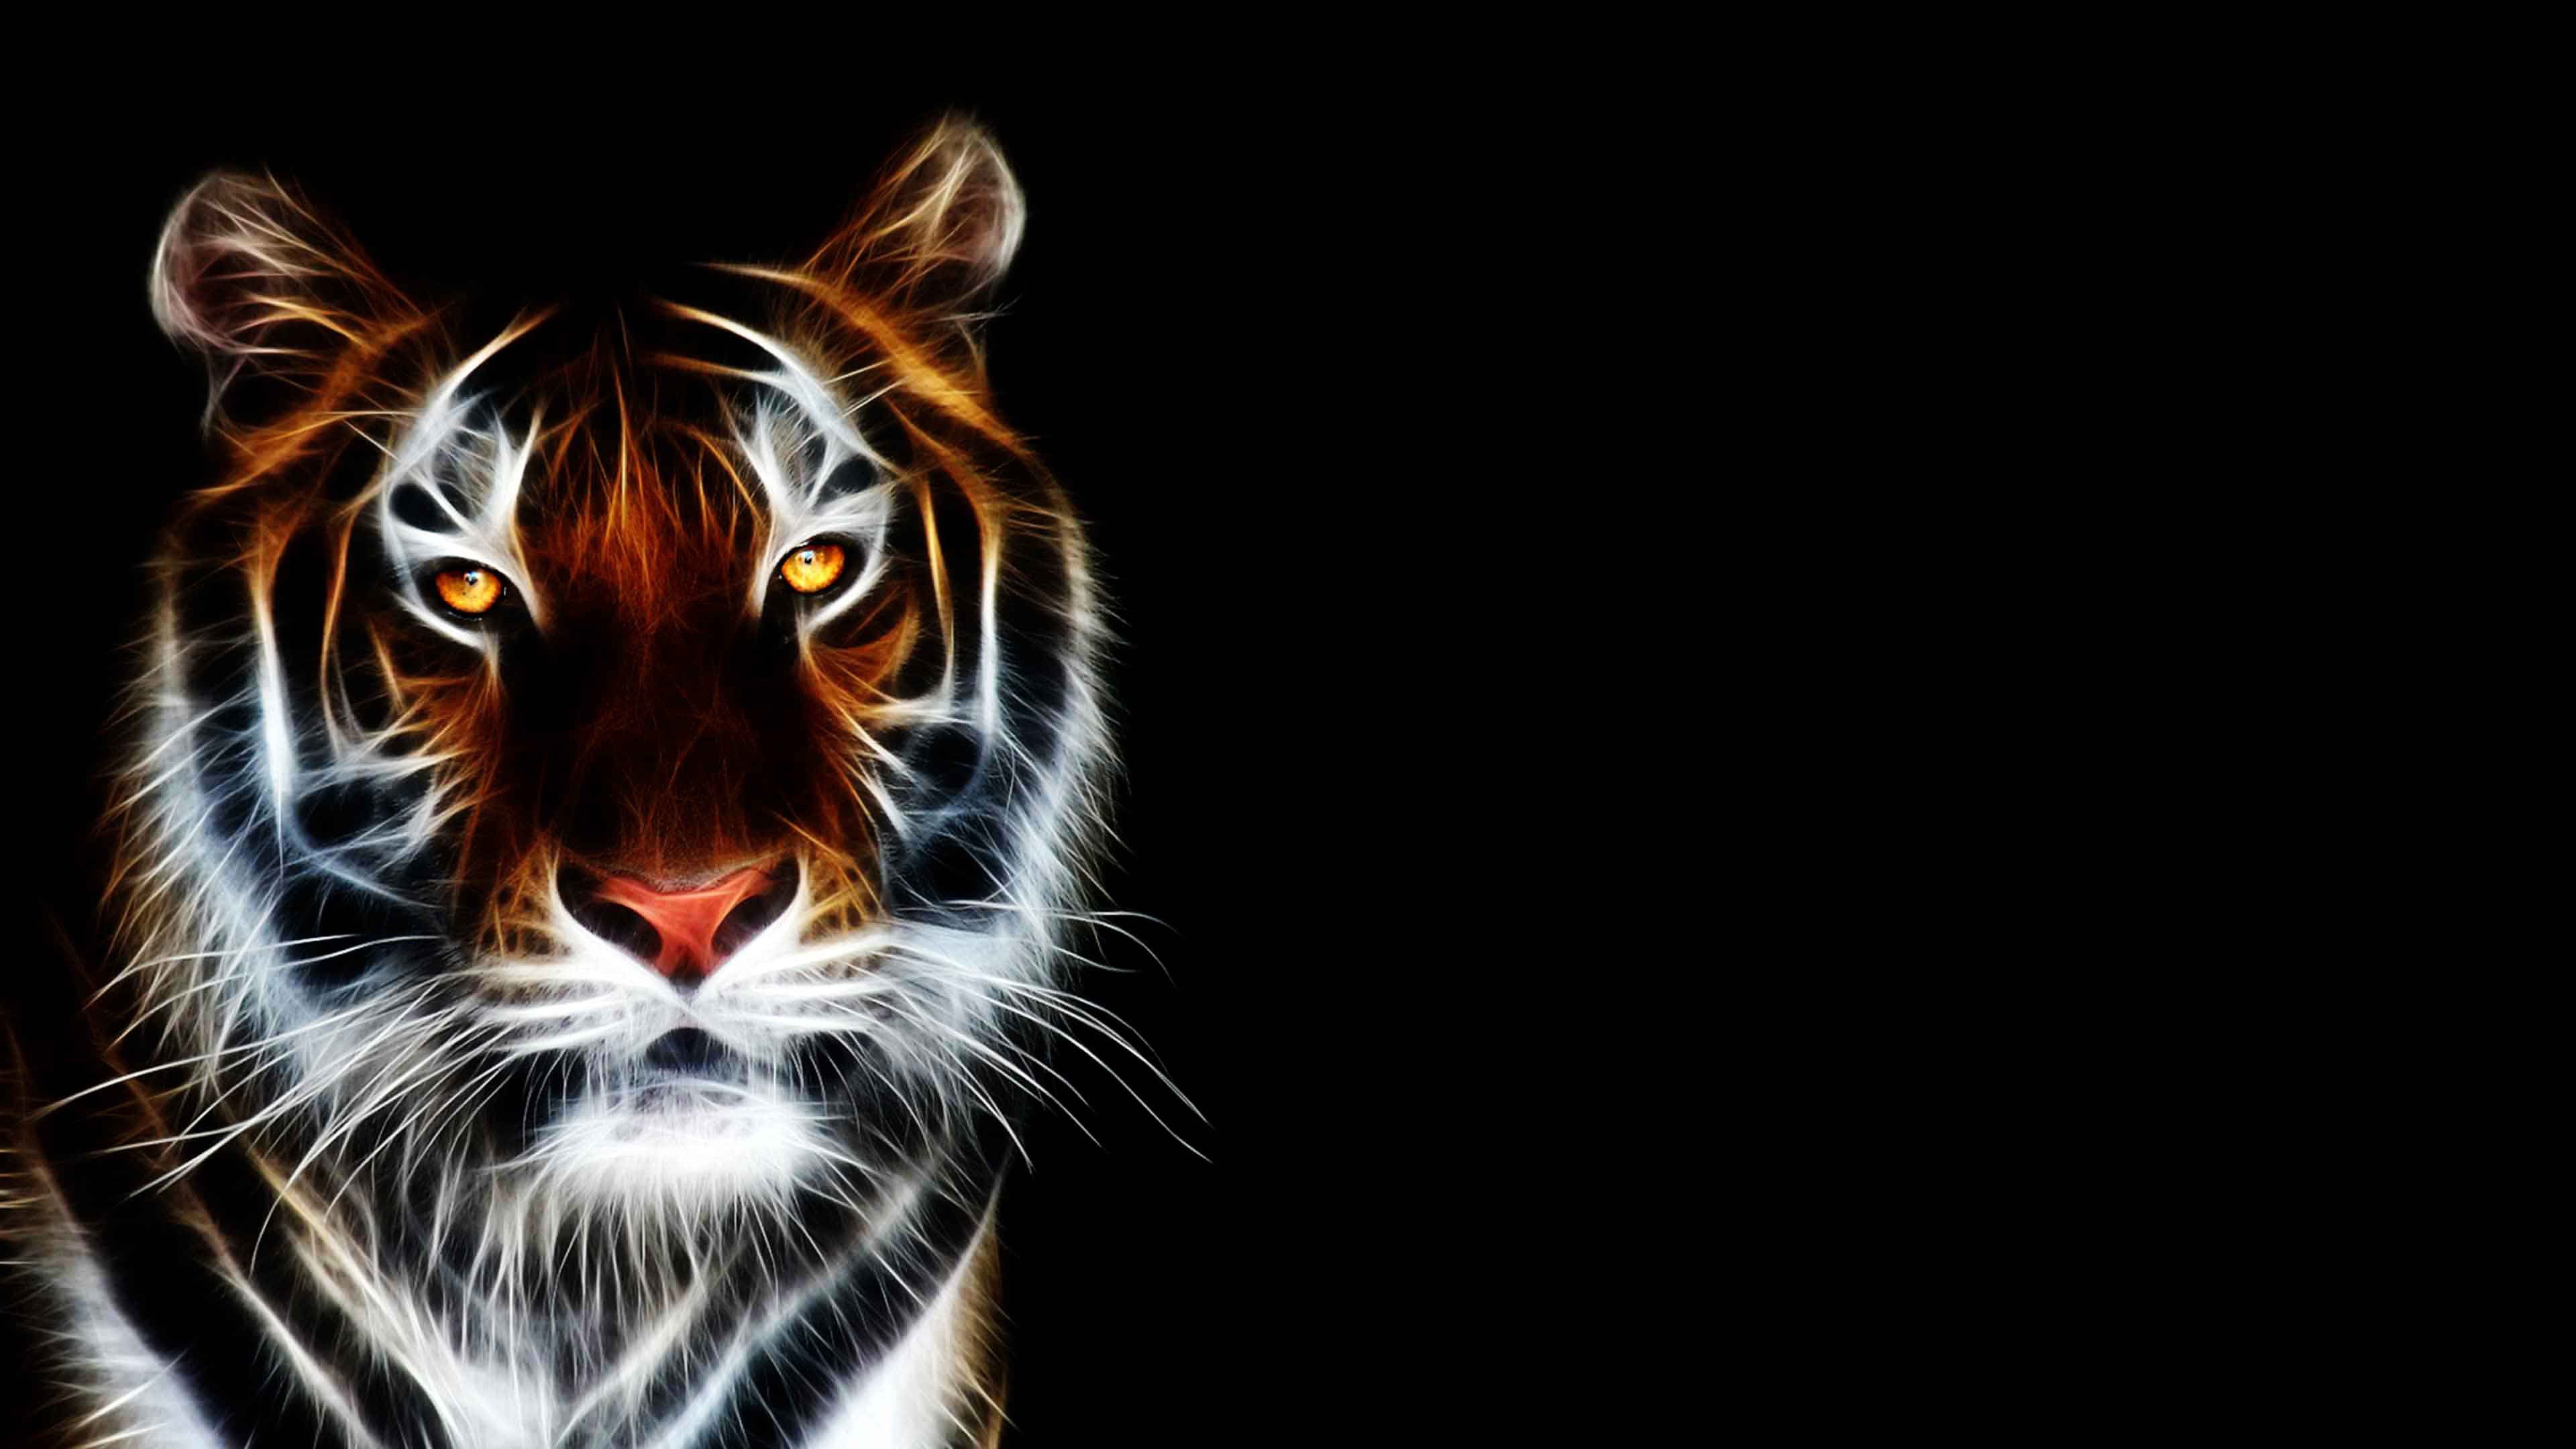 3840x2160 animated tiger 3d high resolution